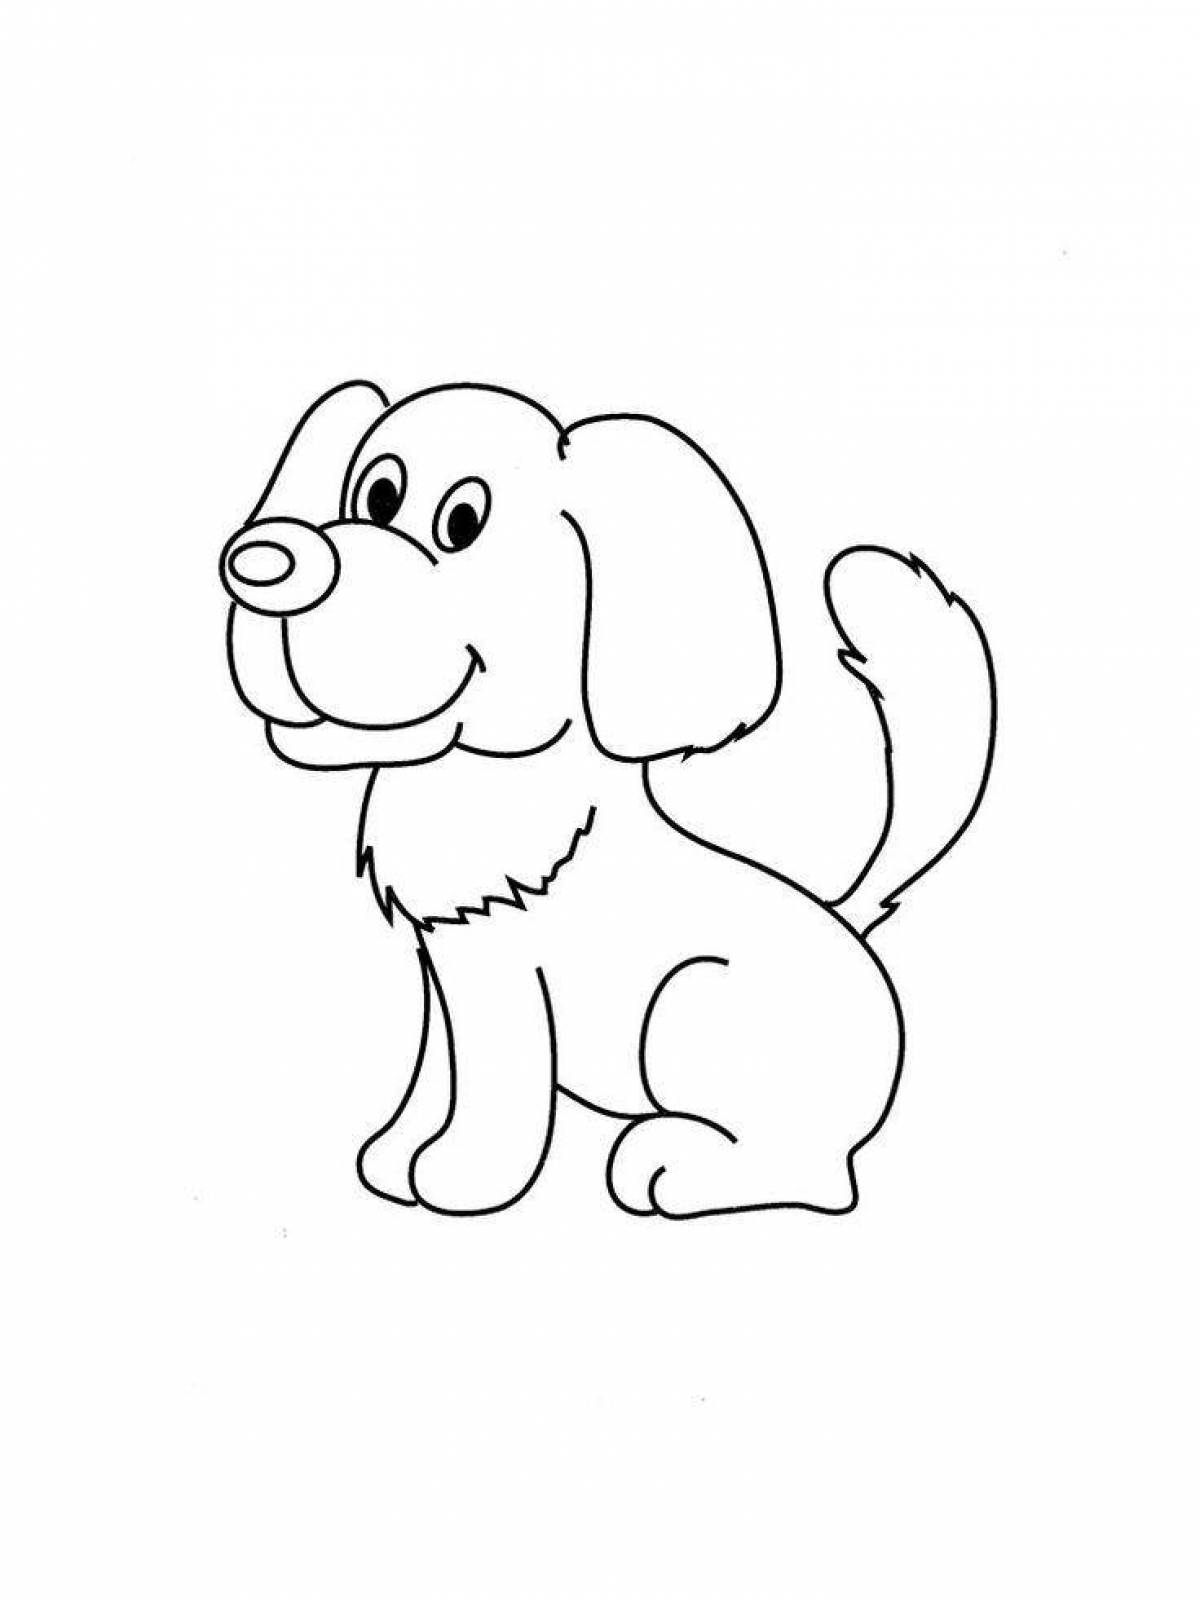 Fantastic dog coloring book for 4-5 year olds